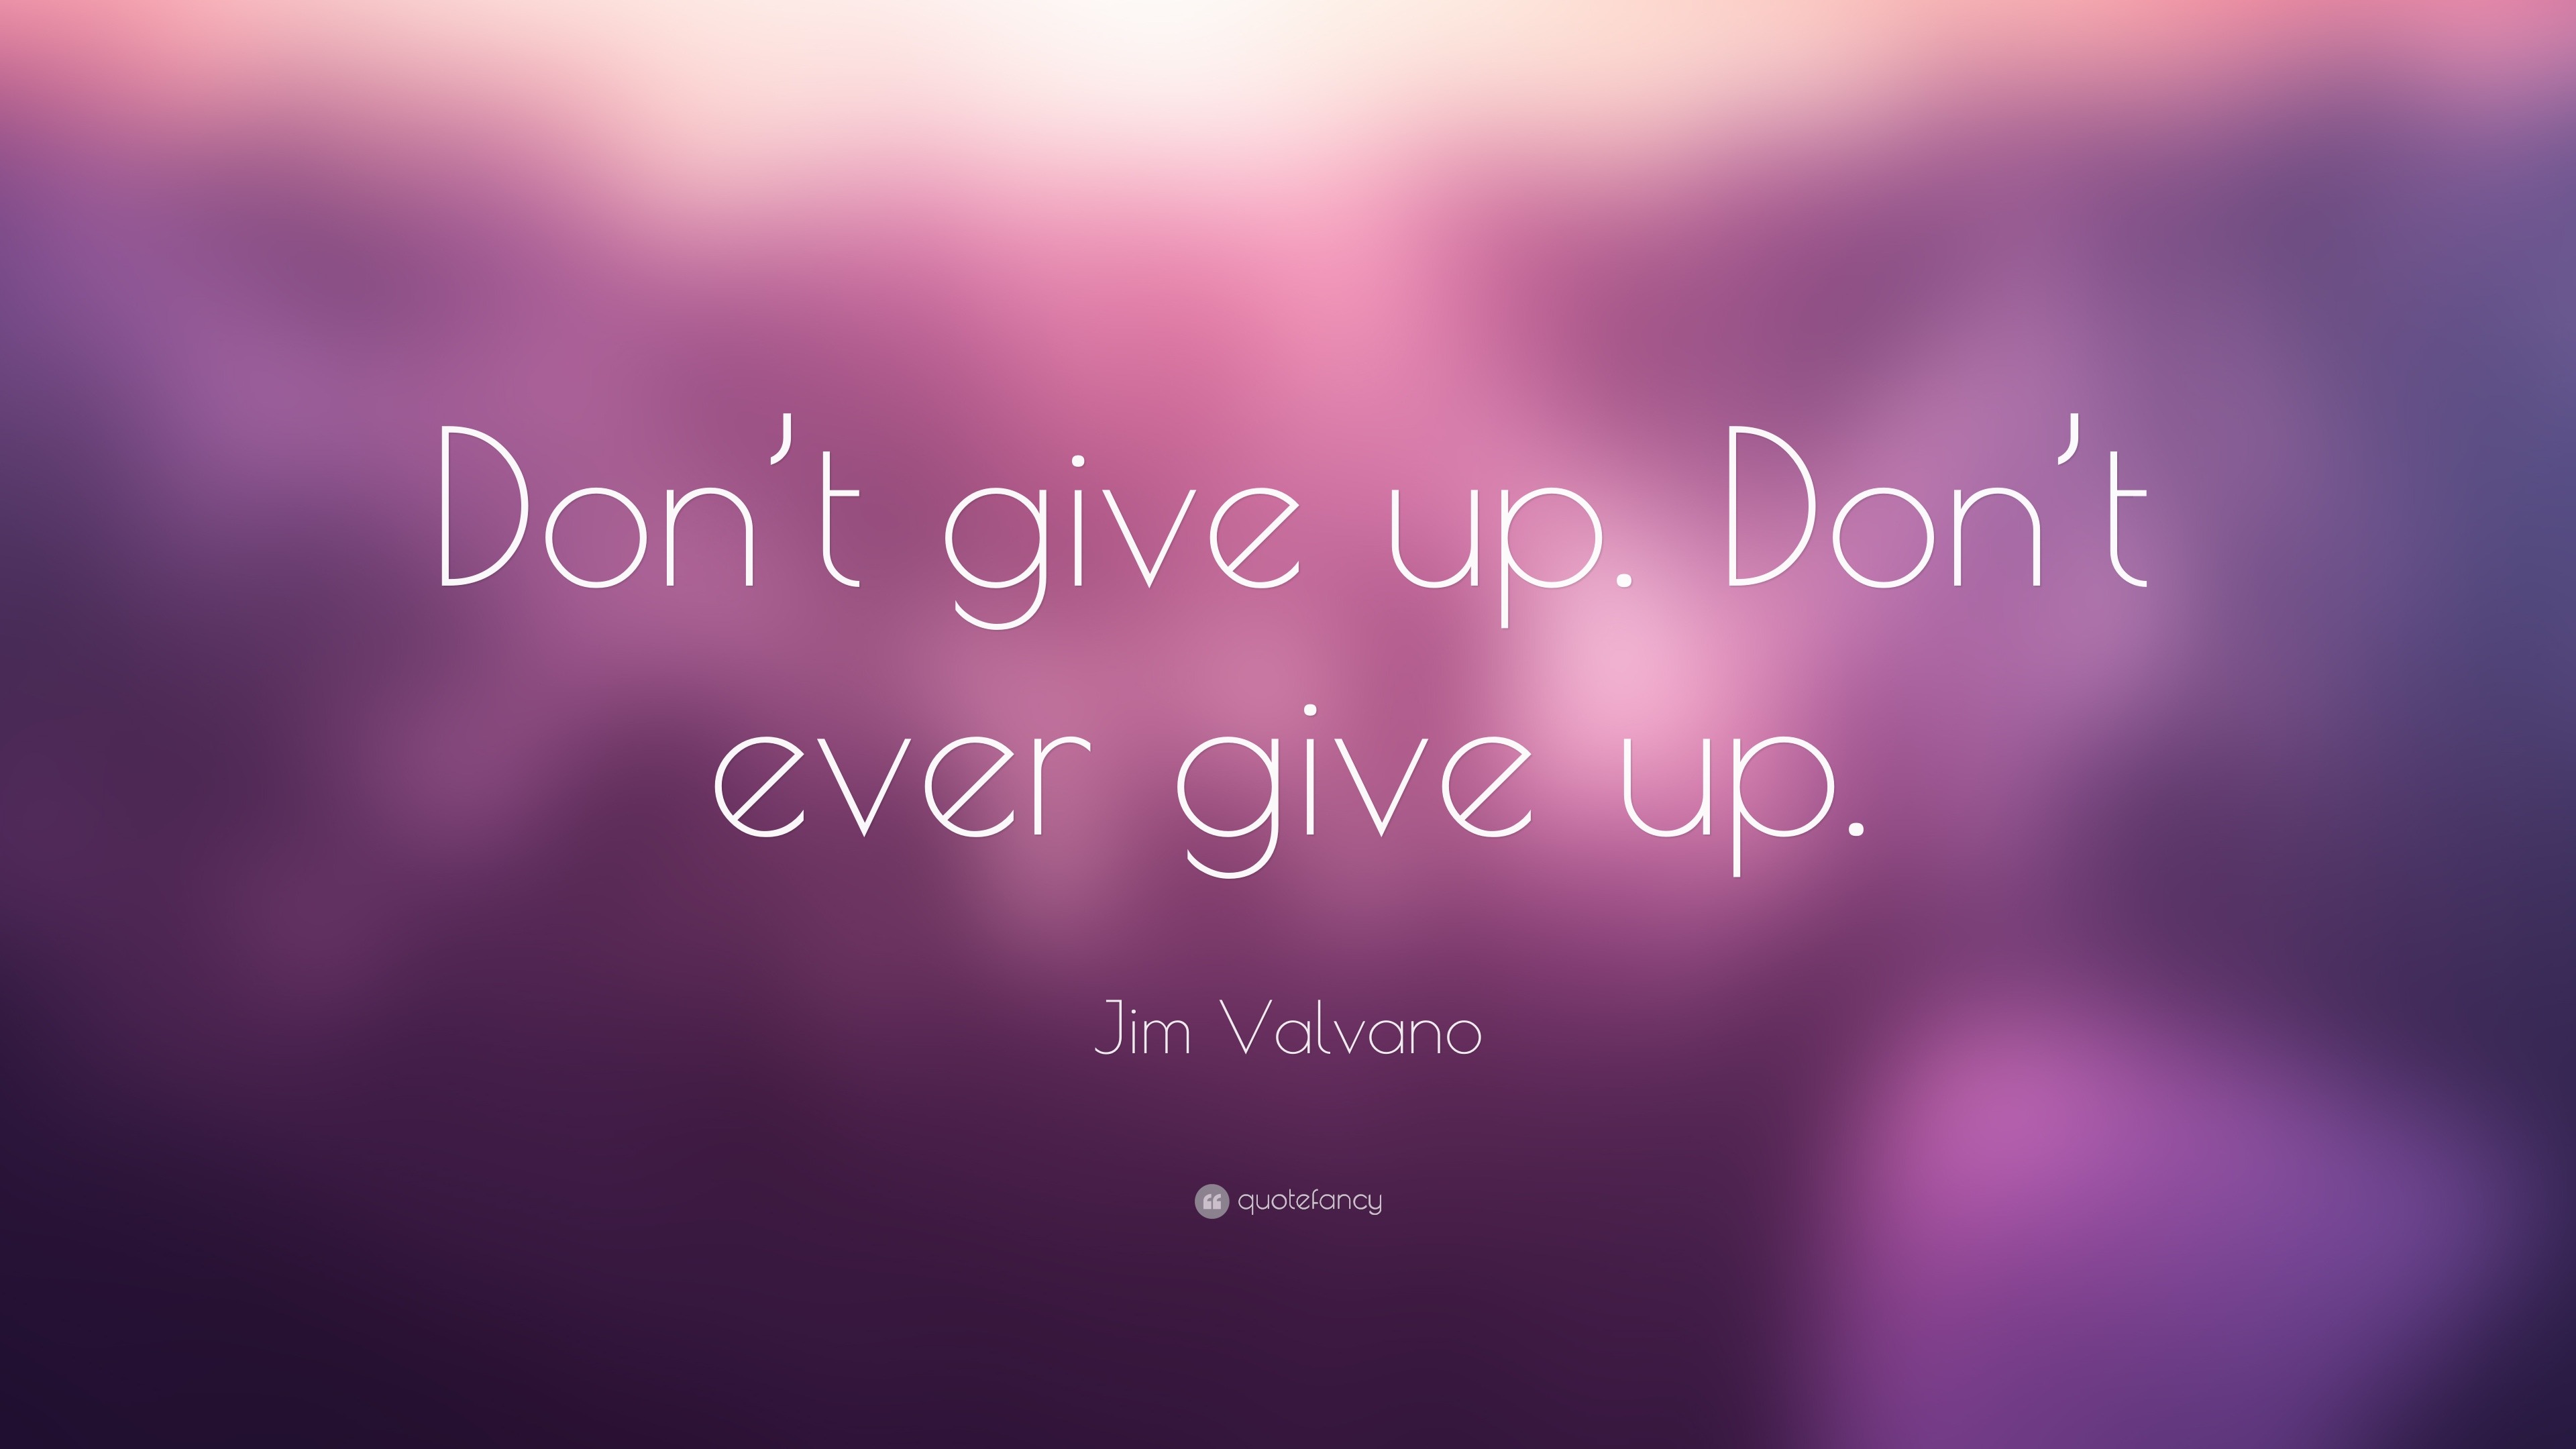 Jim Valvano Quote: “Don’t give up. Don’t ever give up.” (19 wallpapers